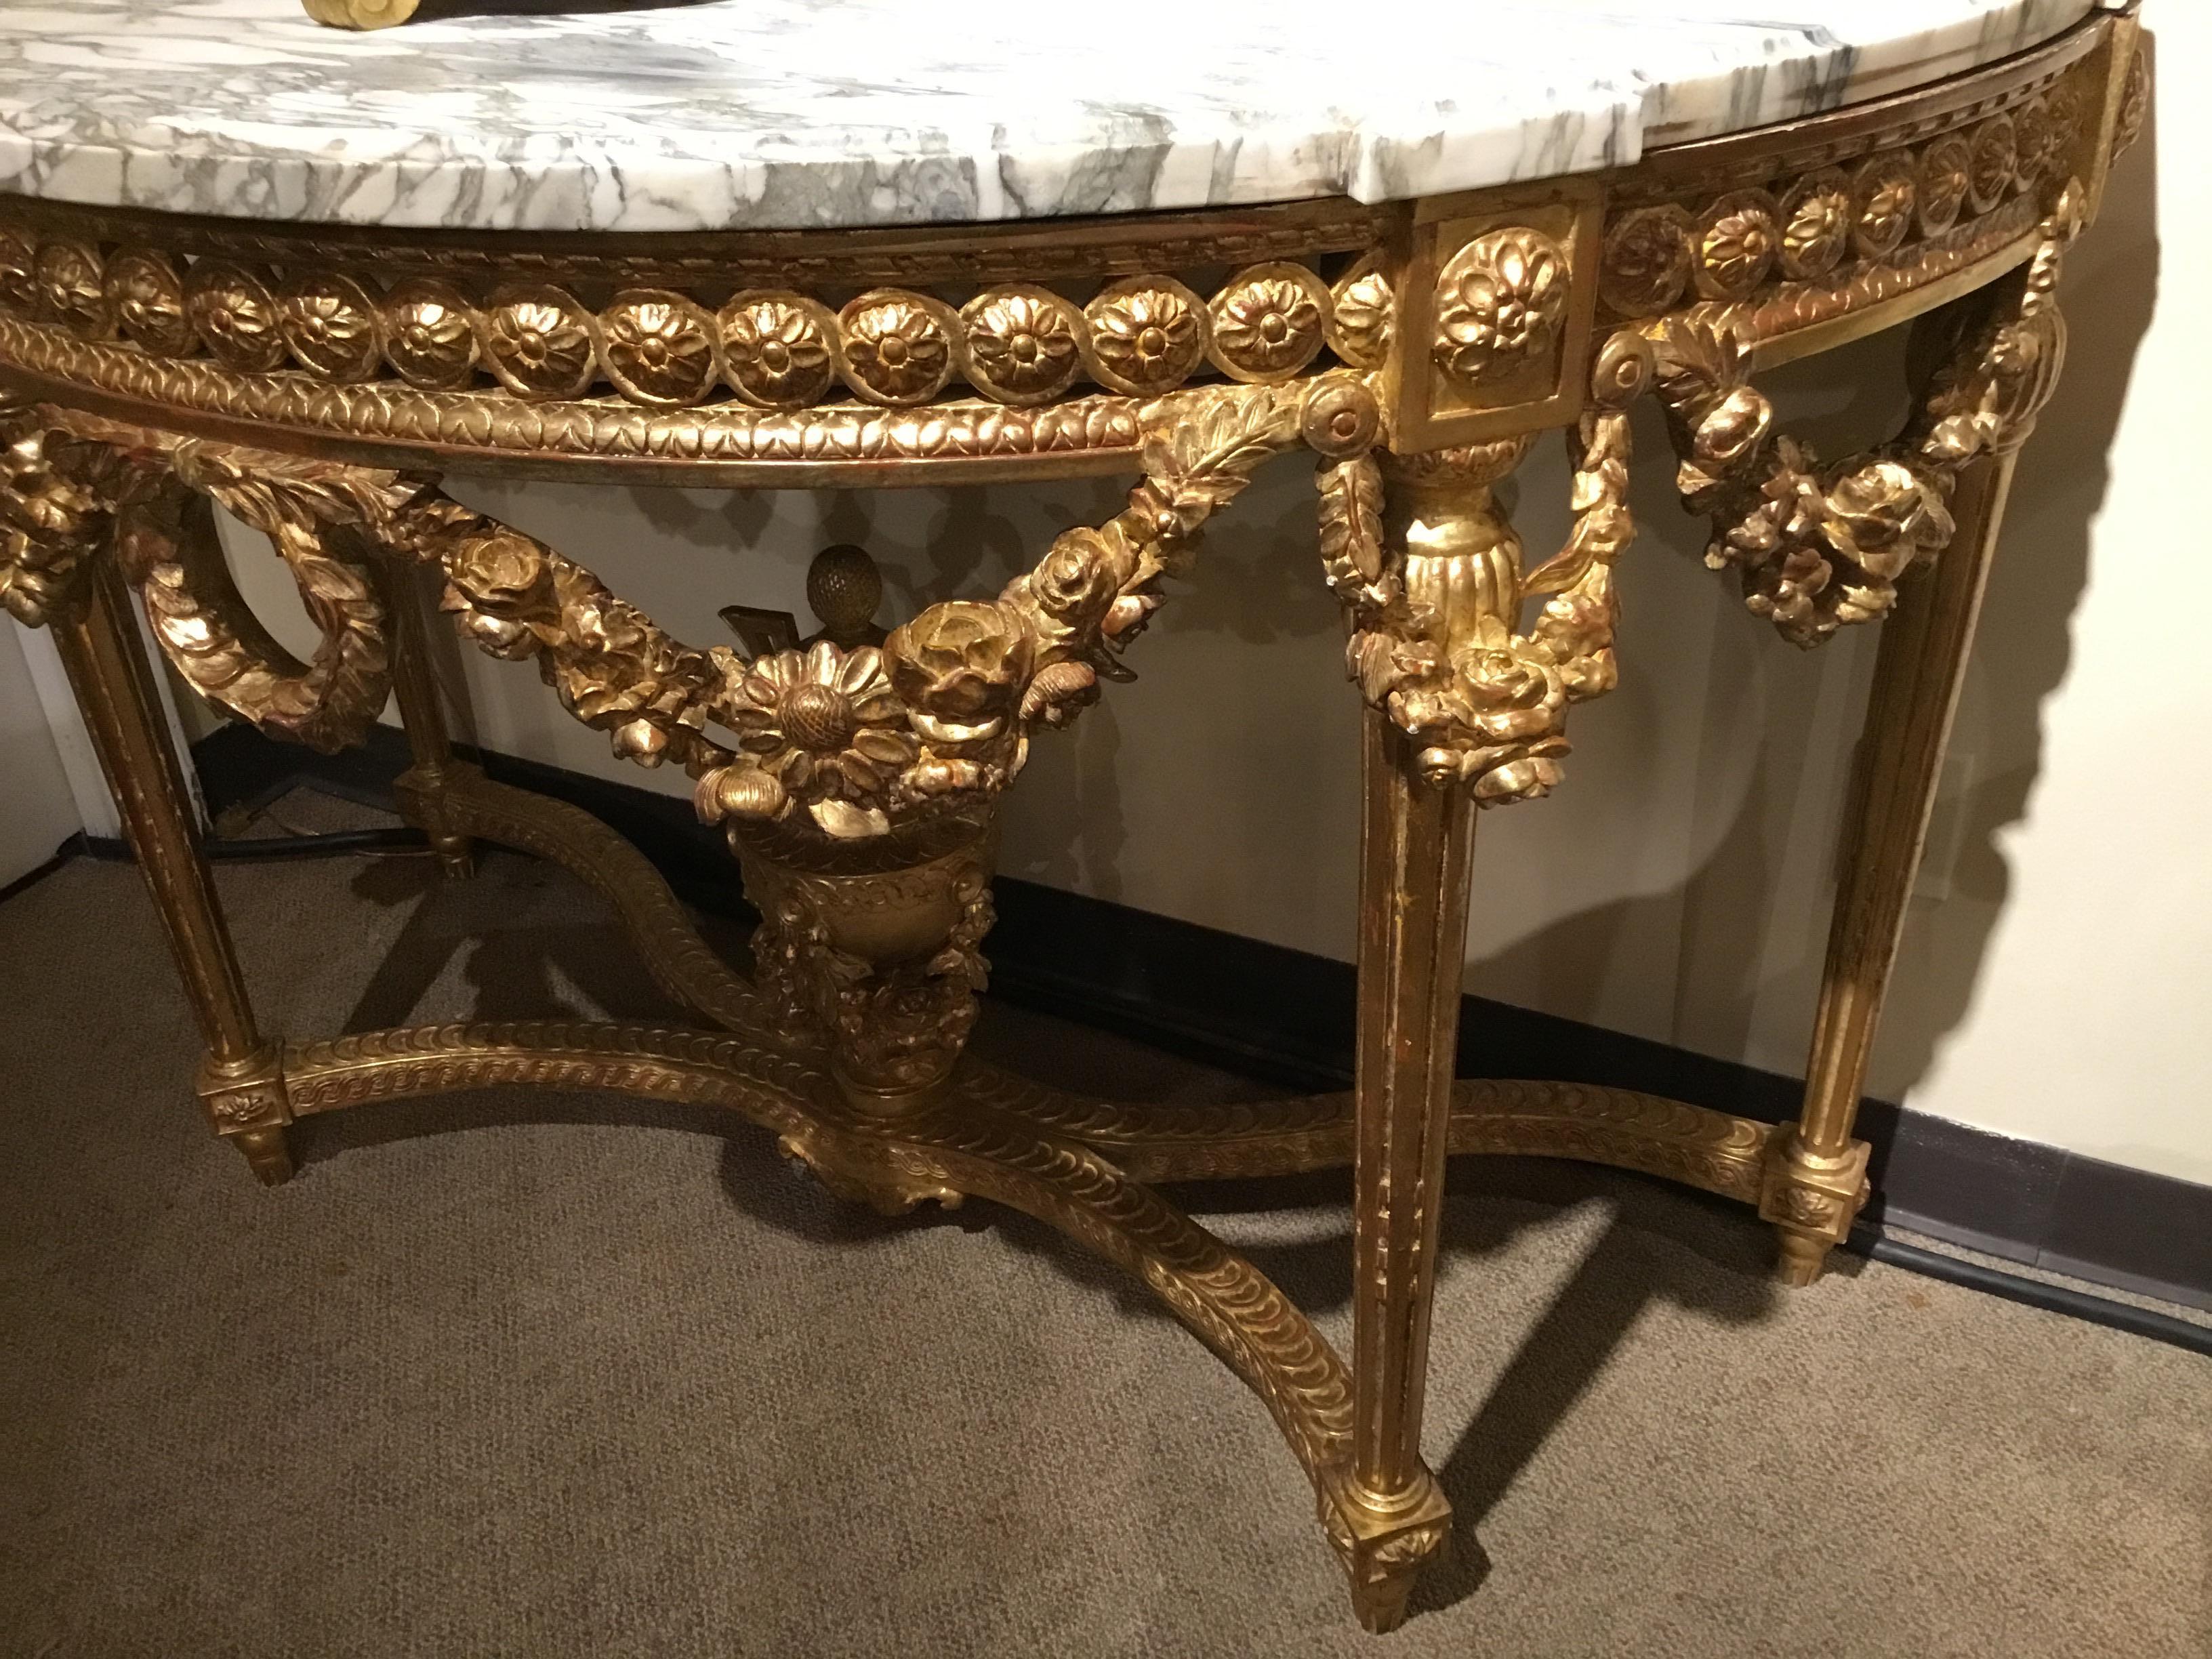 Demilune shaped consoles in giltwood having floral and foliate design in the draping and swags
that adorn the apron of these pieces. A stretcher in an X-formation comes together at the center
with an exquisite urn finial. The marble tops are in